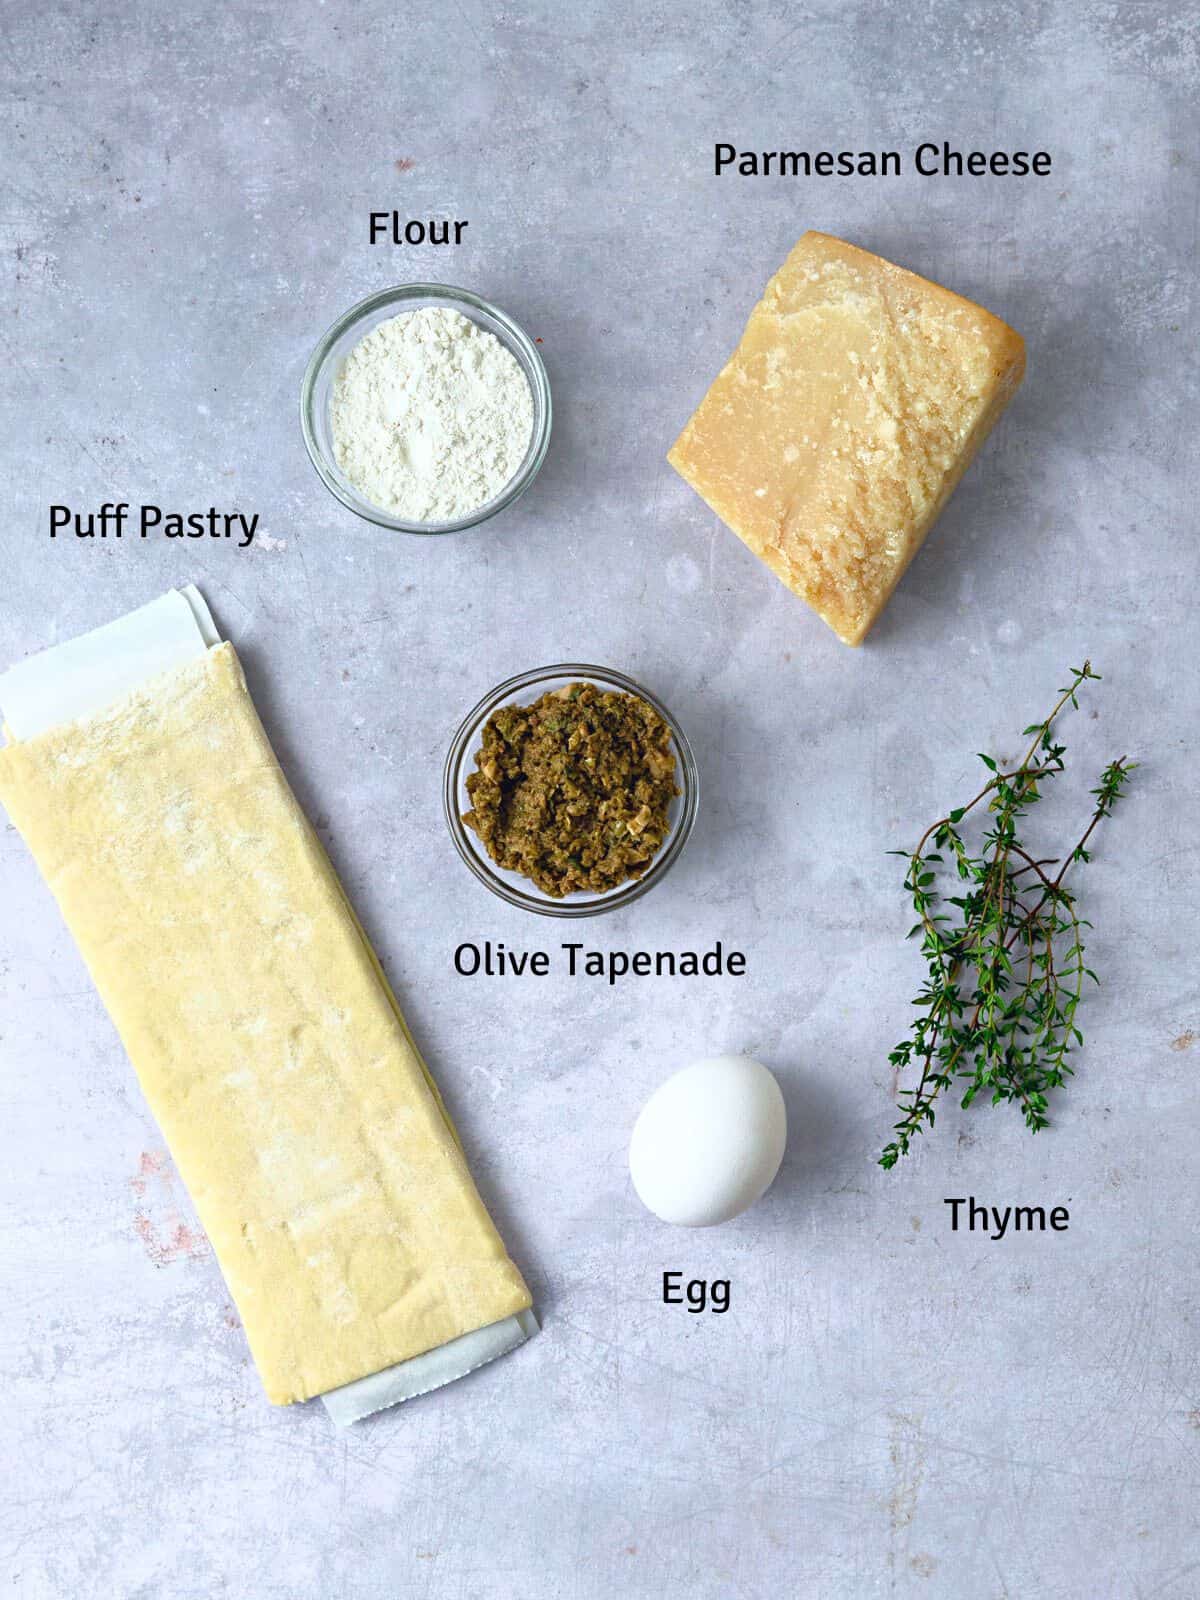 Ingredients for puff pastry straws, including Parmesan cheese, fresh thyme and olive tapenade.